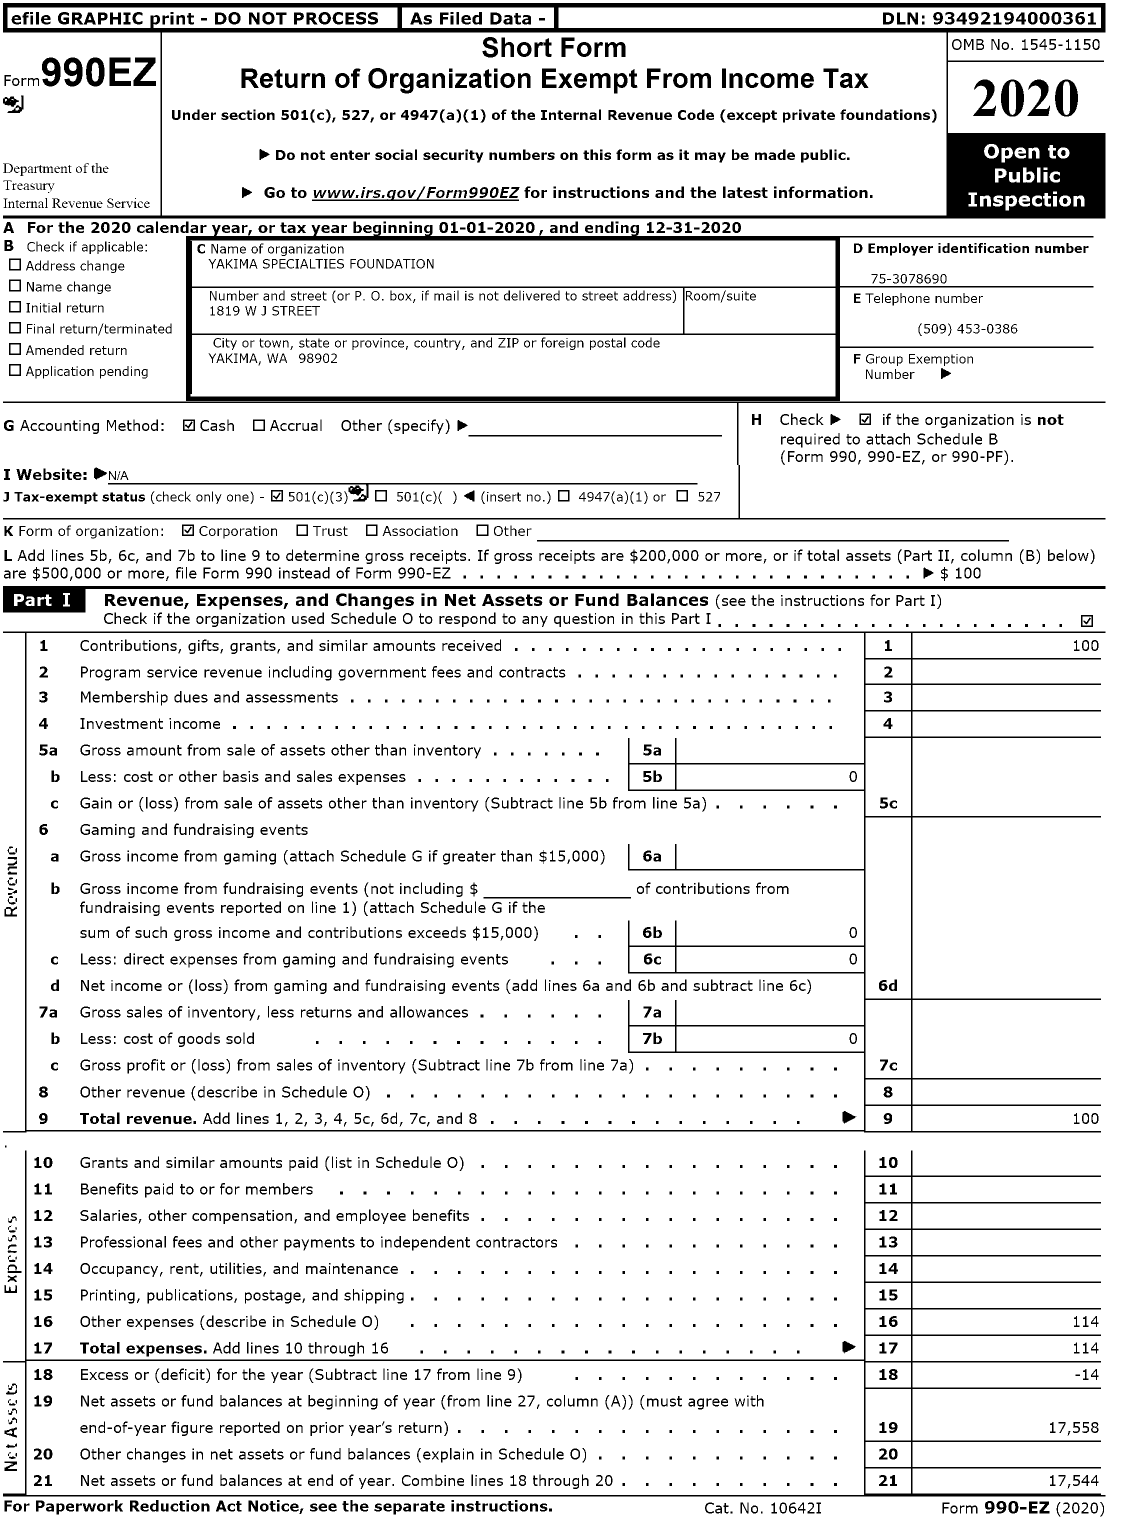 Image of first page of 2020 Form 990EZ for Yakima Specialties Foundation